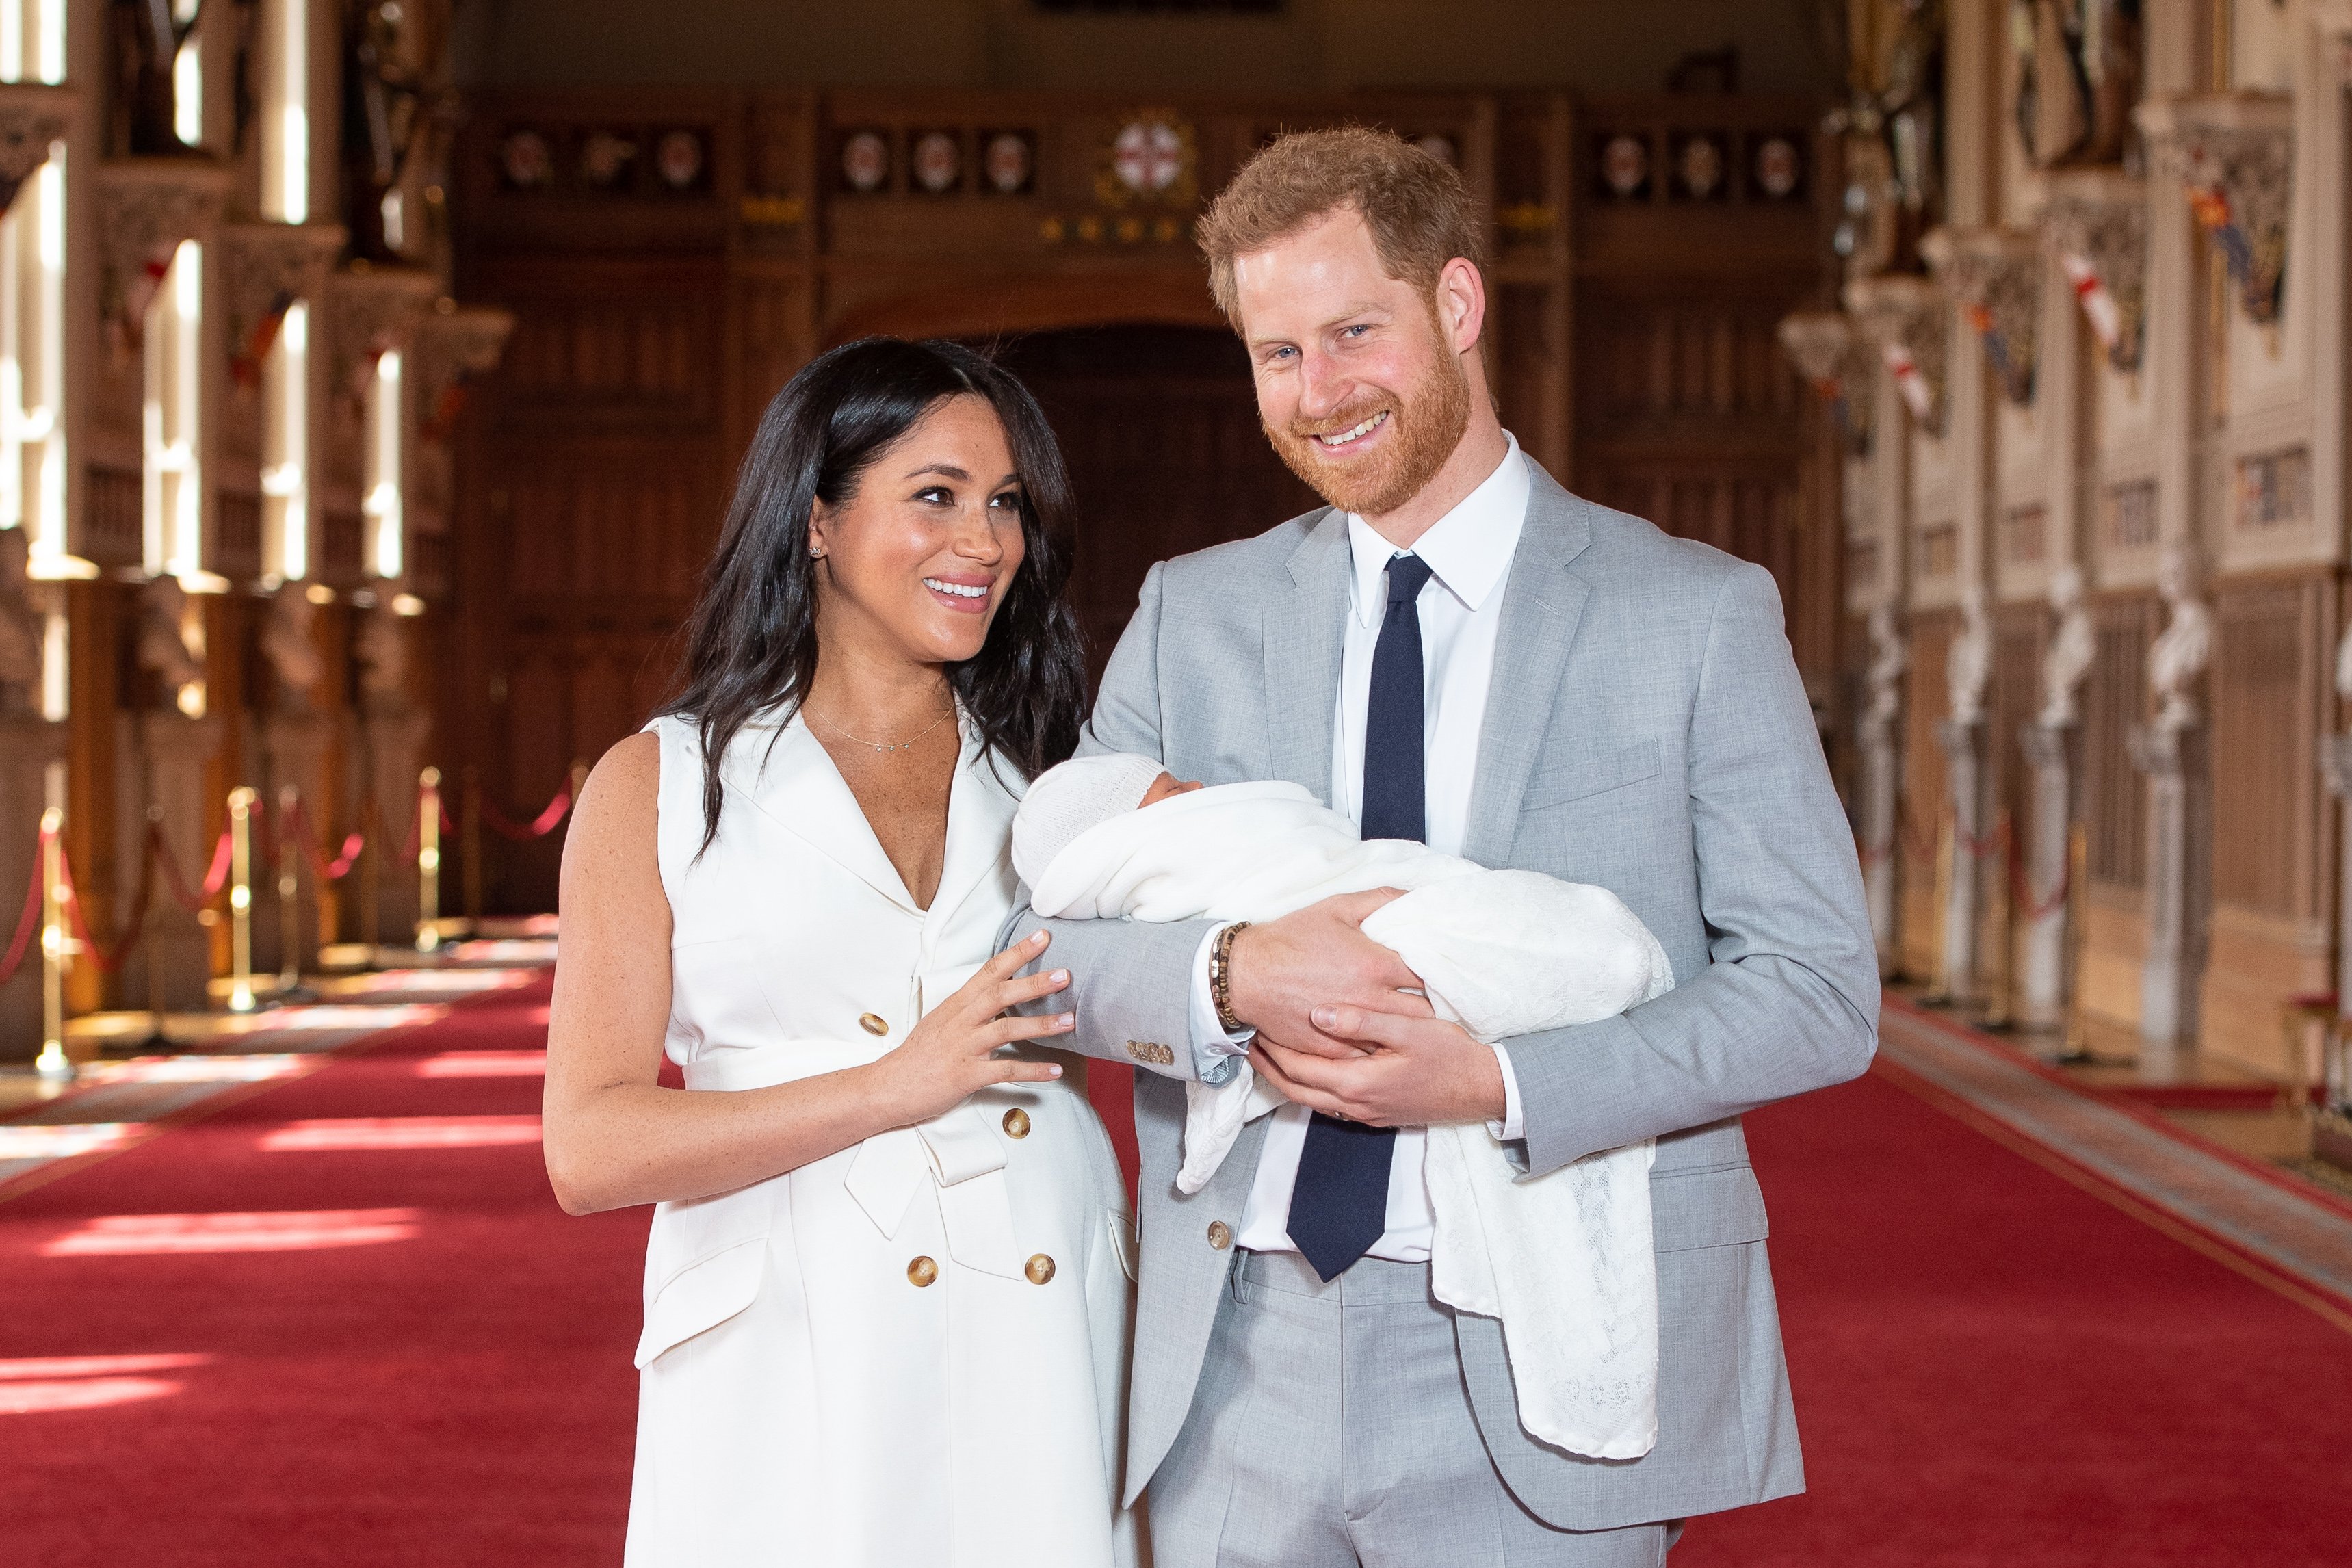 Prince Harry & Meghan Markle with their son Archie on May 8, 2019 in Windsor, England | Photo: Getty Images